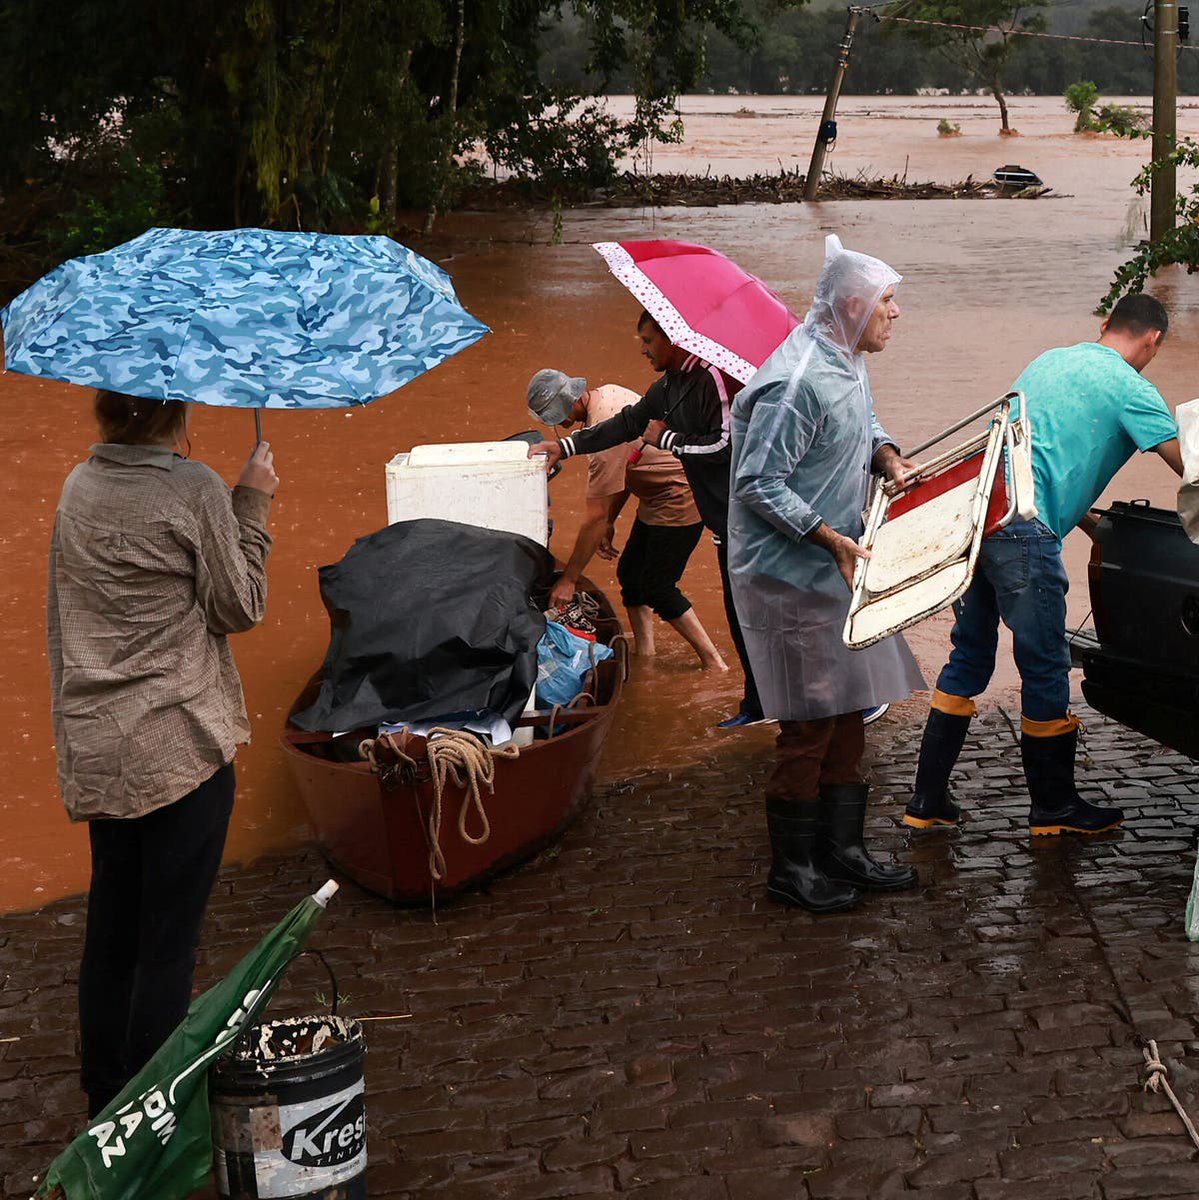 Heavy rains in Brazil's south caused a devastating natural disaster, leaving cities, homes, and families in ruins. Rescue and reconstruction efforts were initiated with authorities and humanitarian organizations. Here are some ways to help!